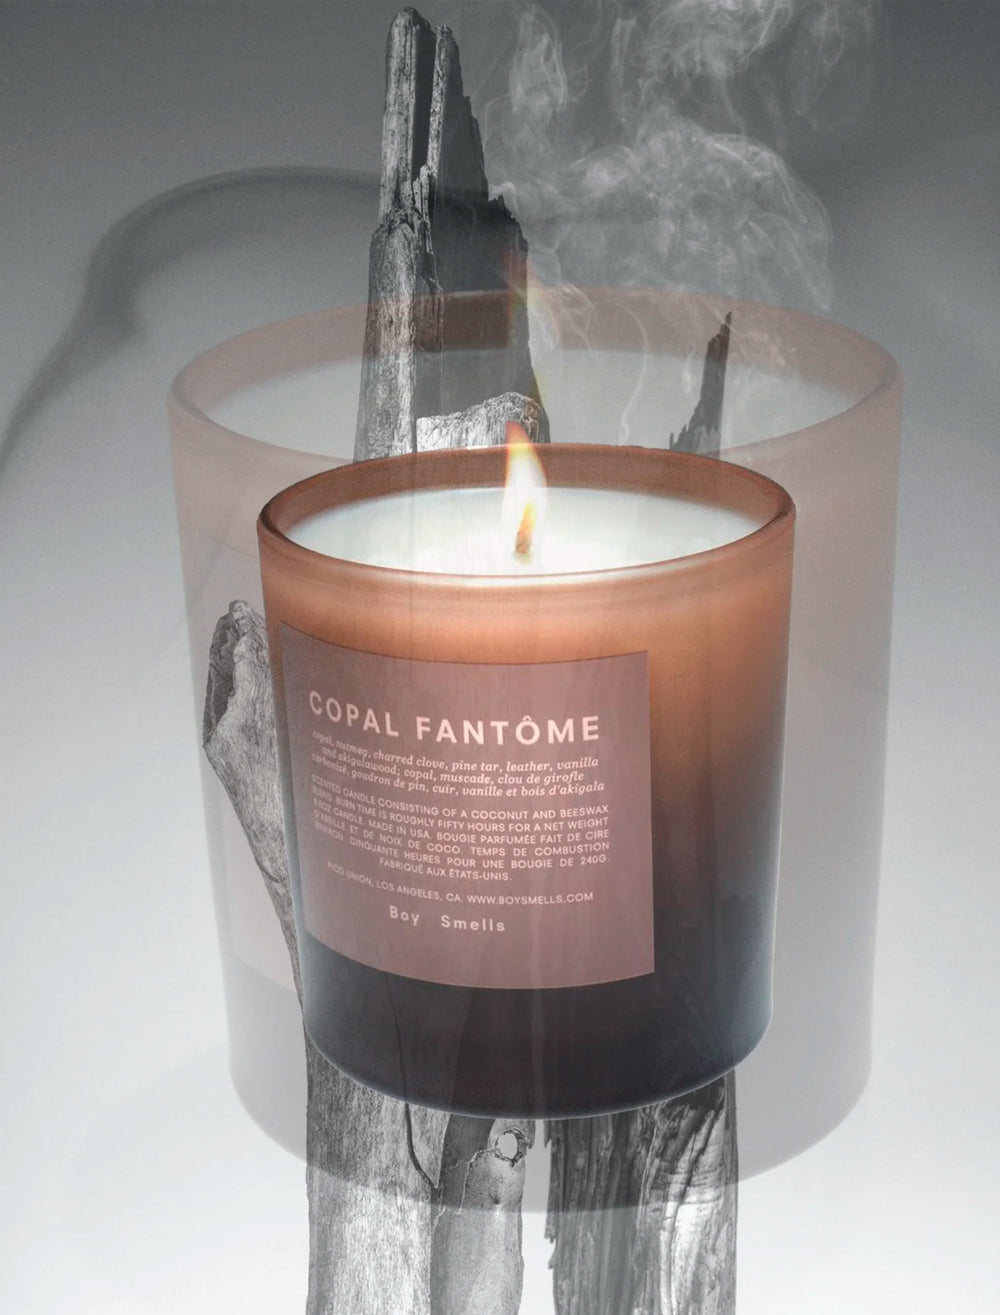 Marketing photo of Boy Smells' copal fantome candle.